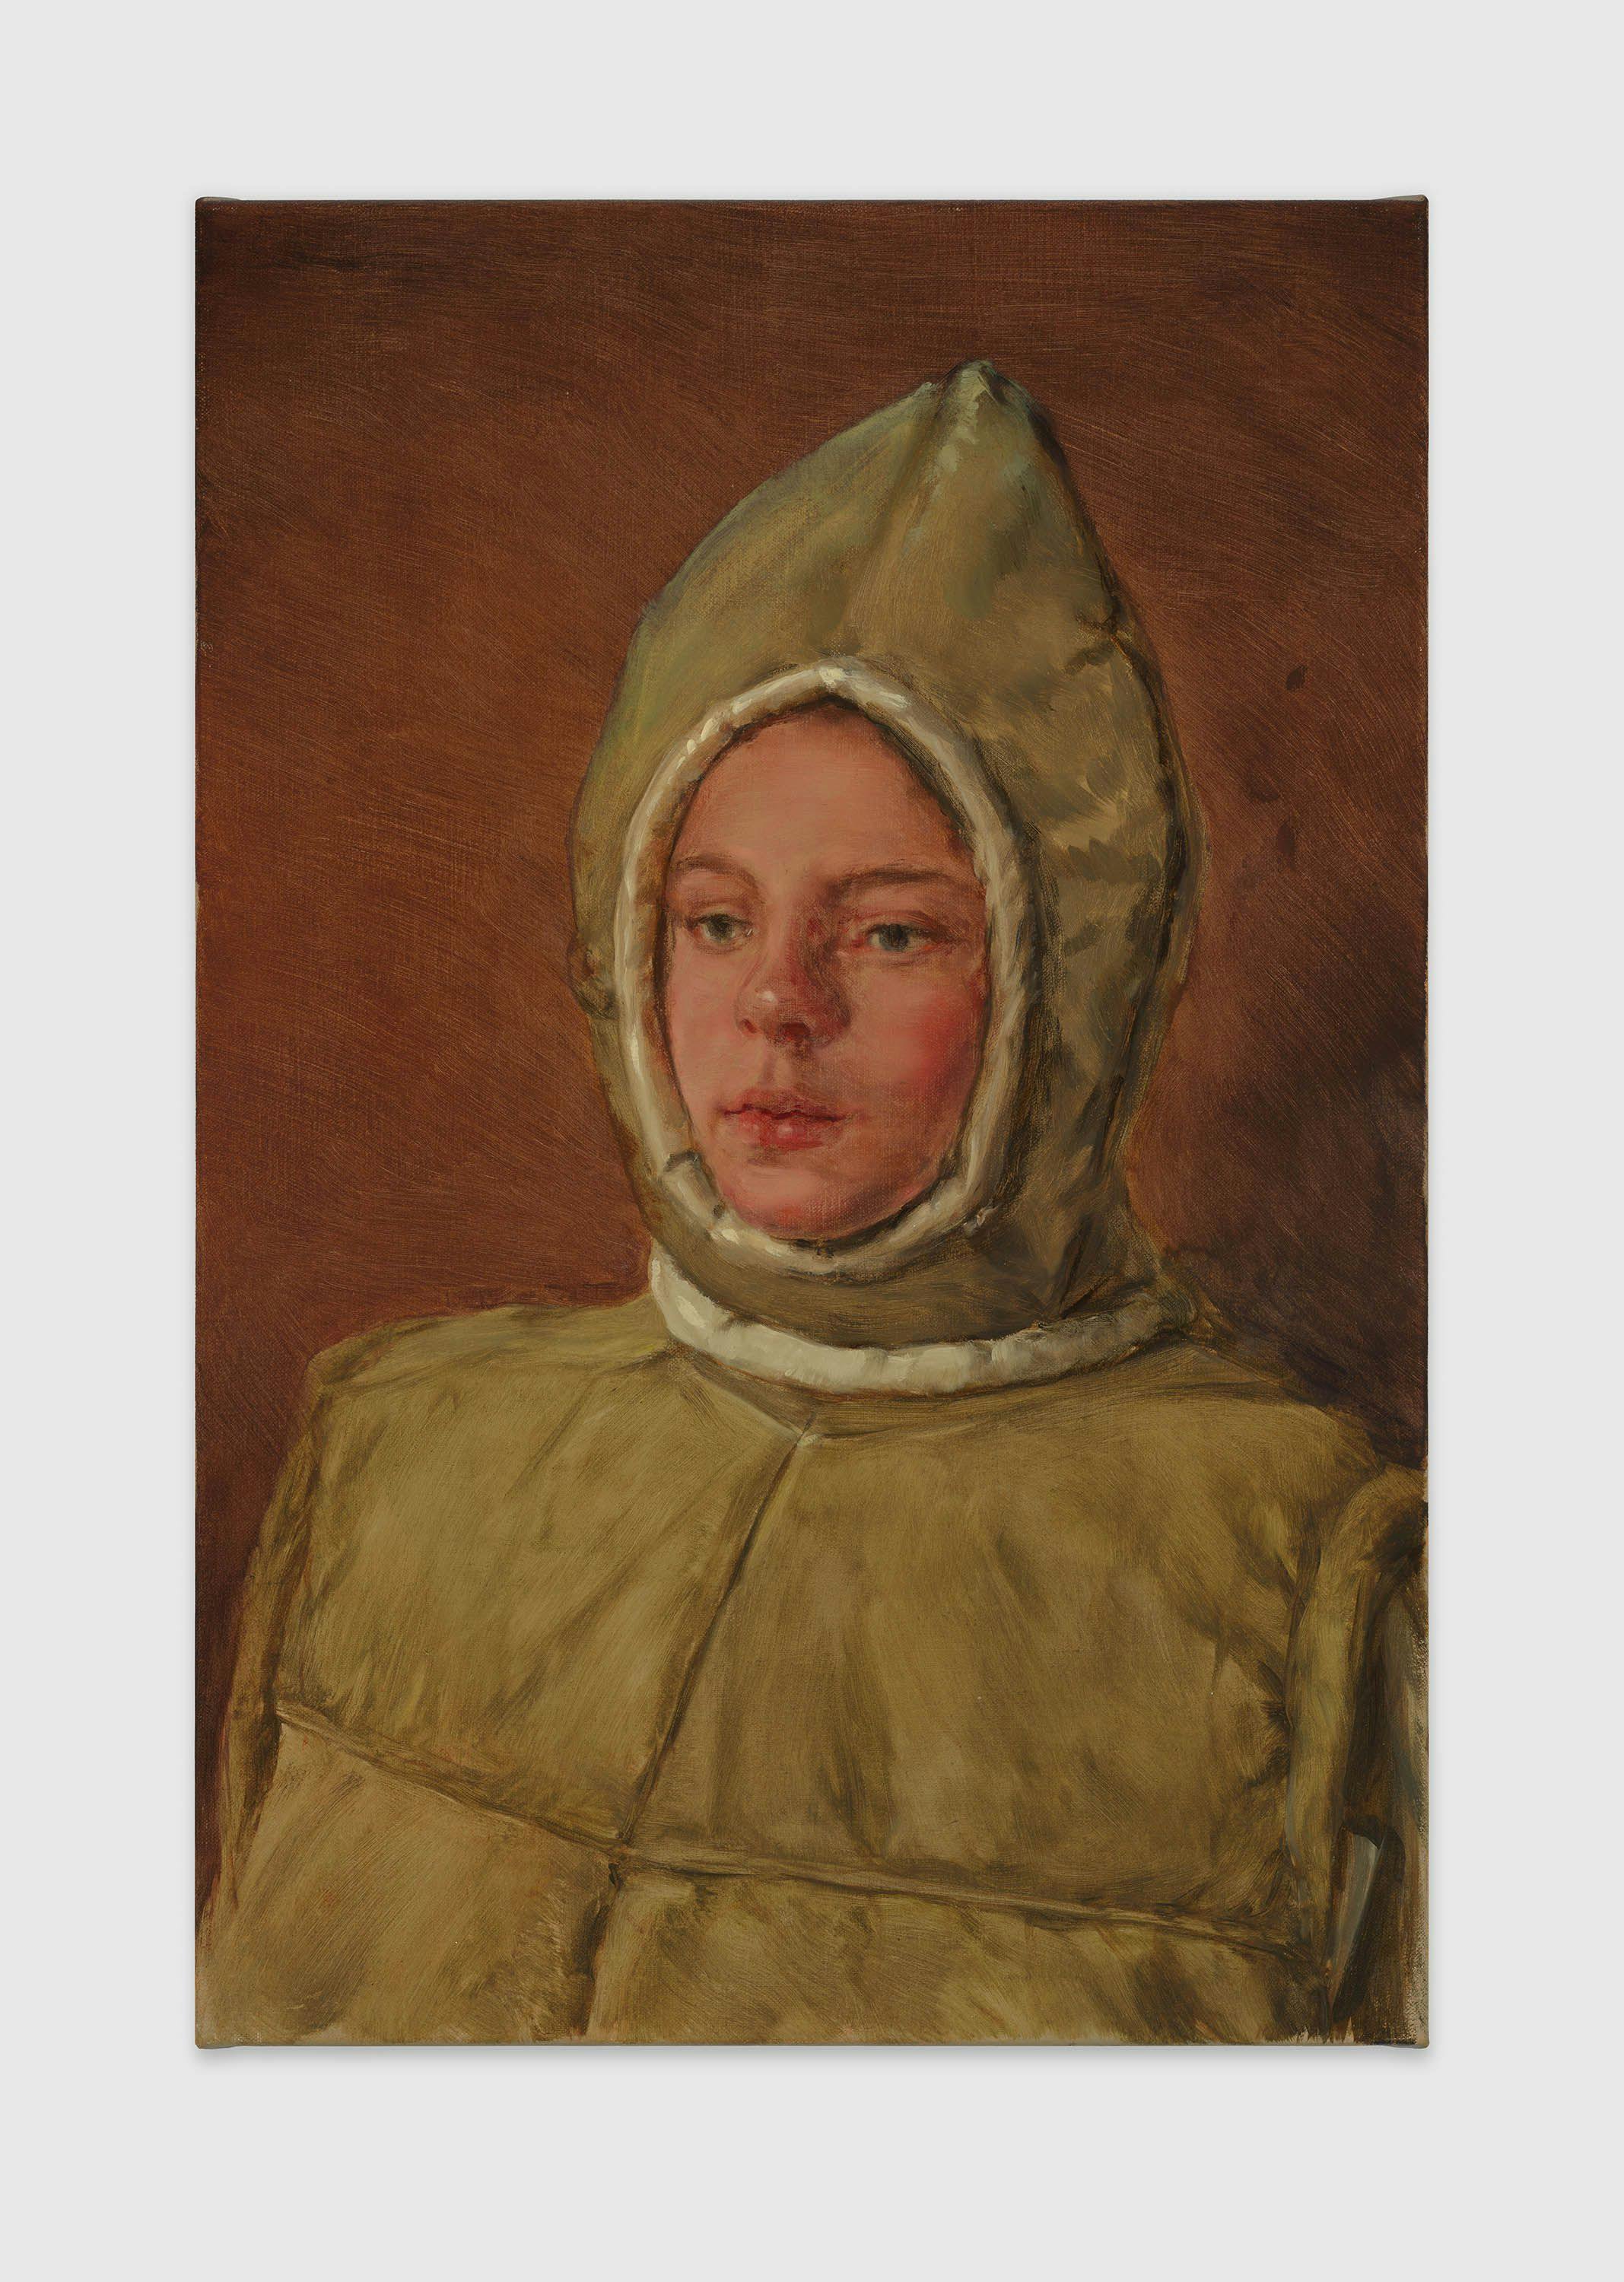 A painting by Michaël Borremans, titled The Fairy, dated 2023.